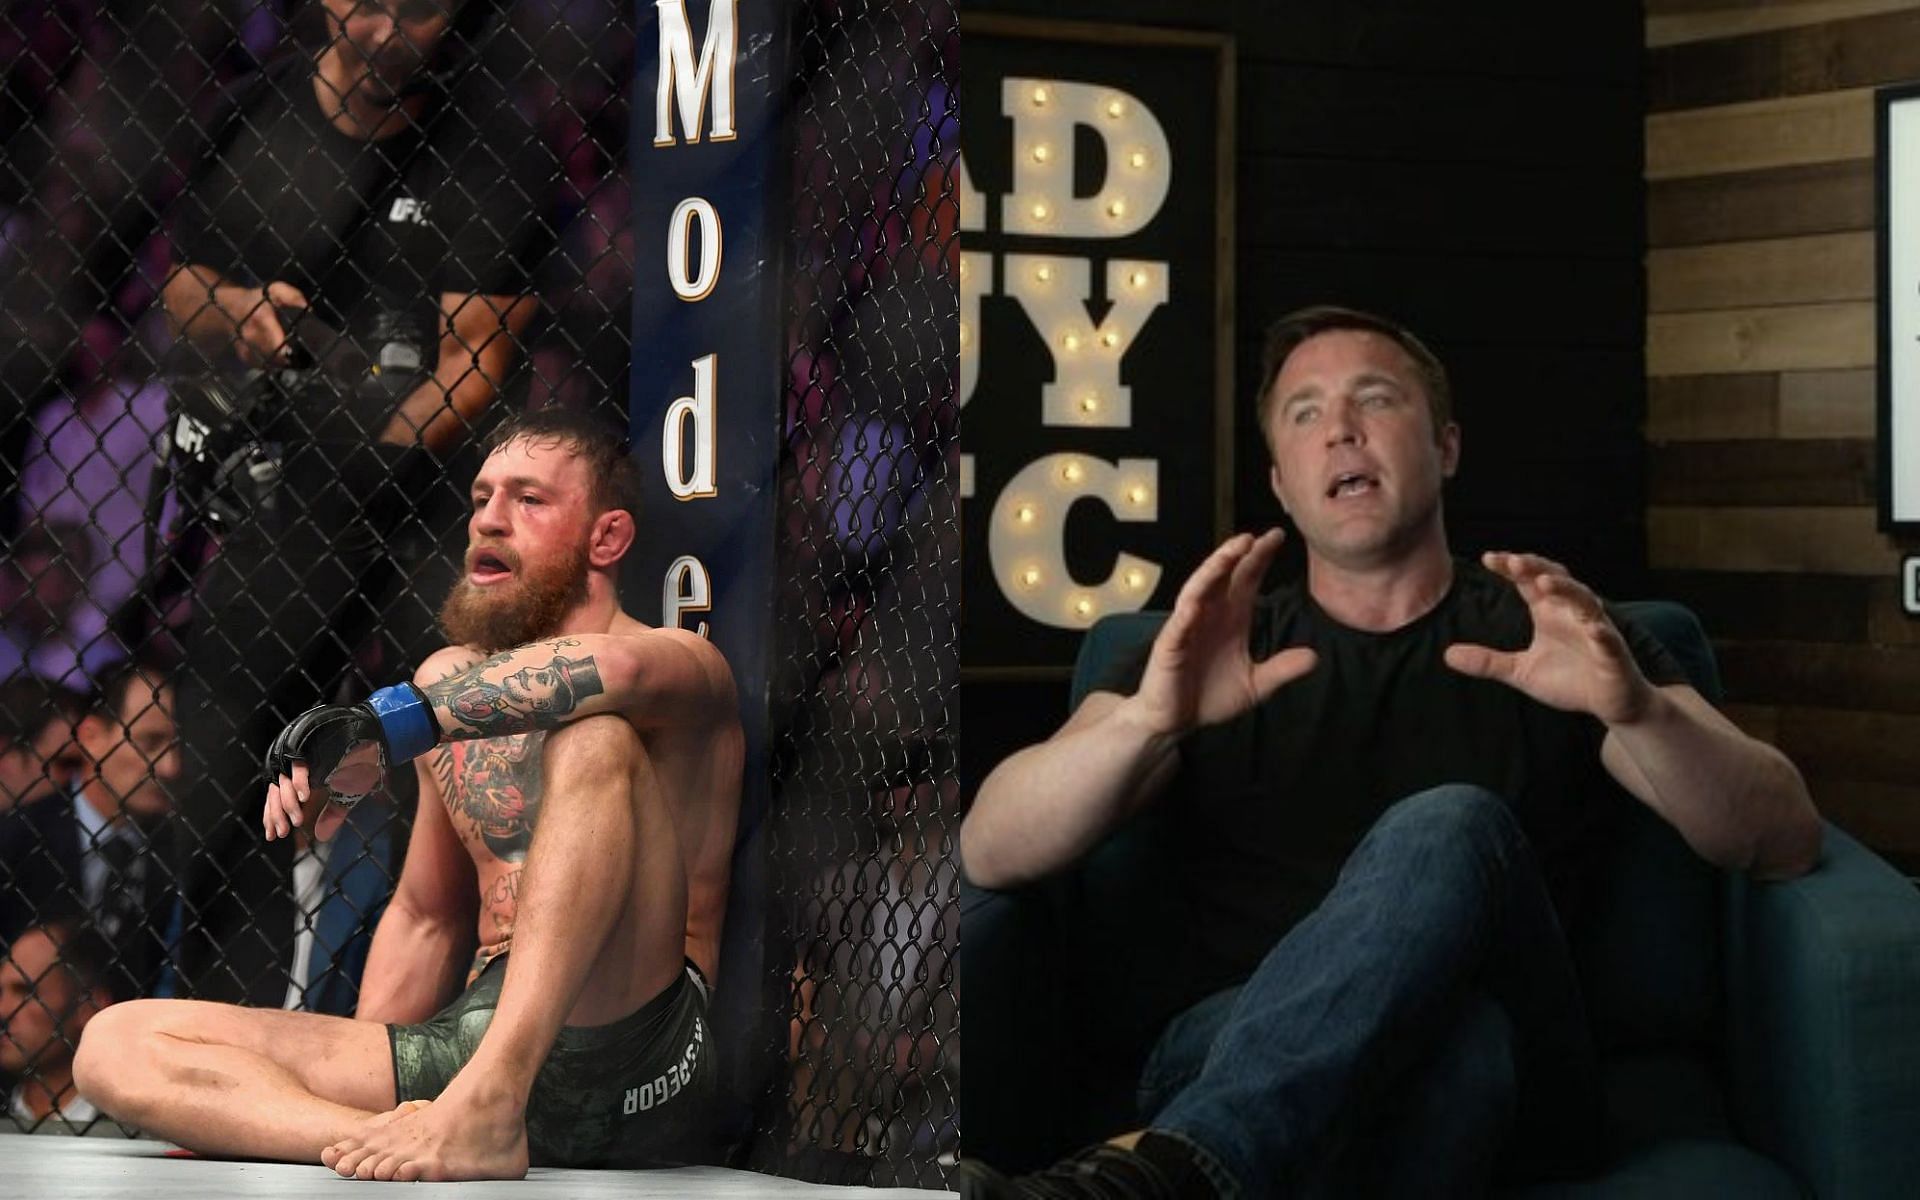 Conor McGregor (left) and Chael Sonnen (right) [Image via @sonnench on Instagram]